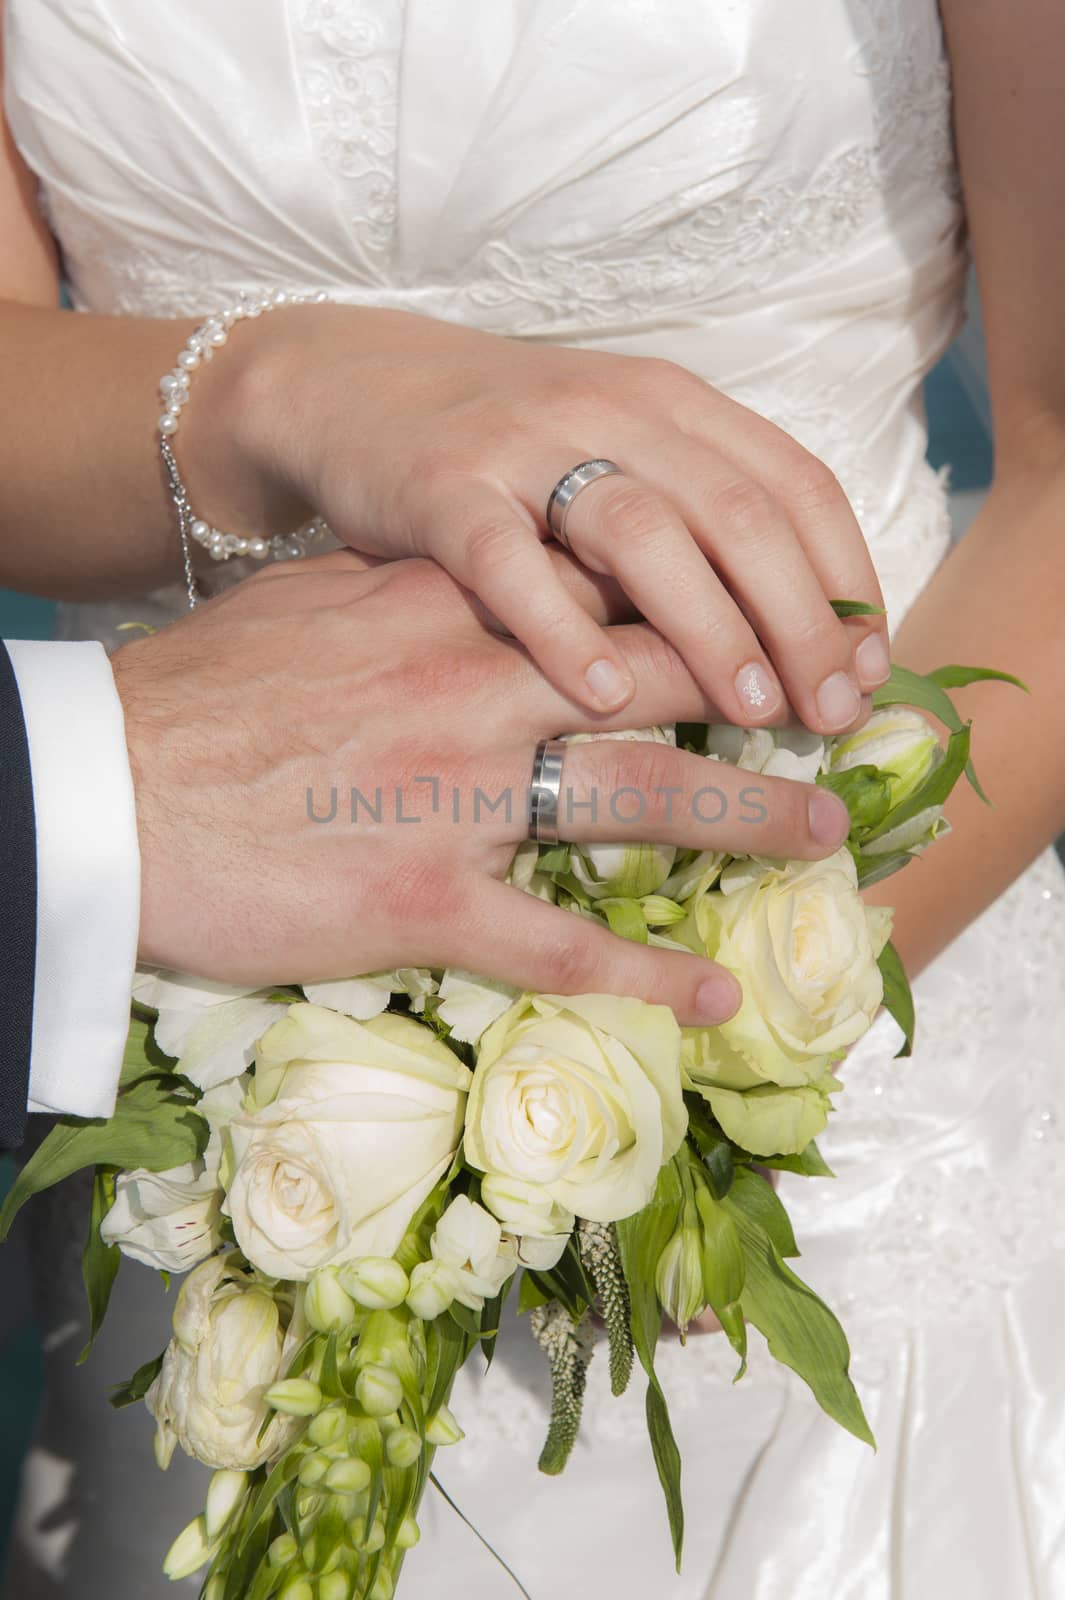 Hands of a bride and groom at a wedding ceremony showing a bouquet and rings